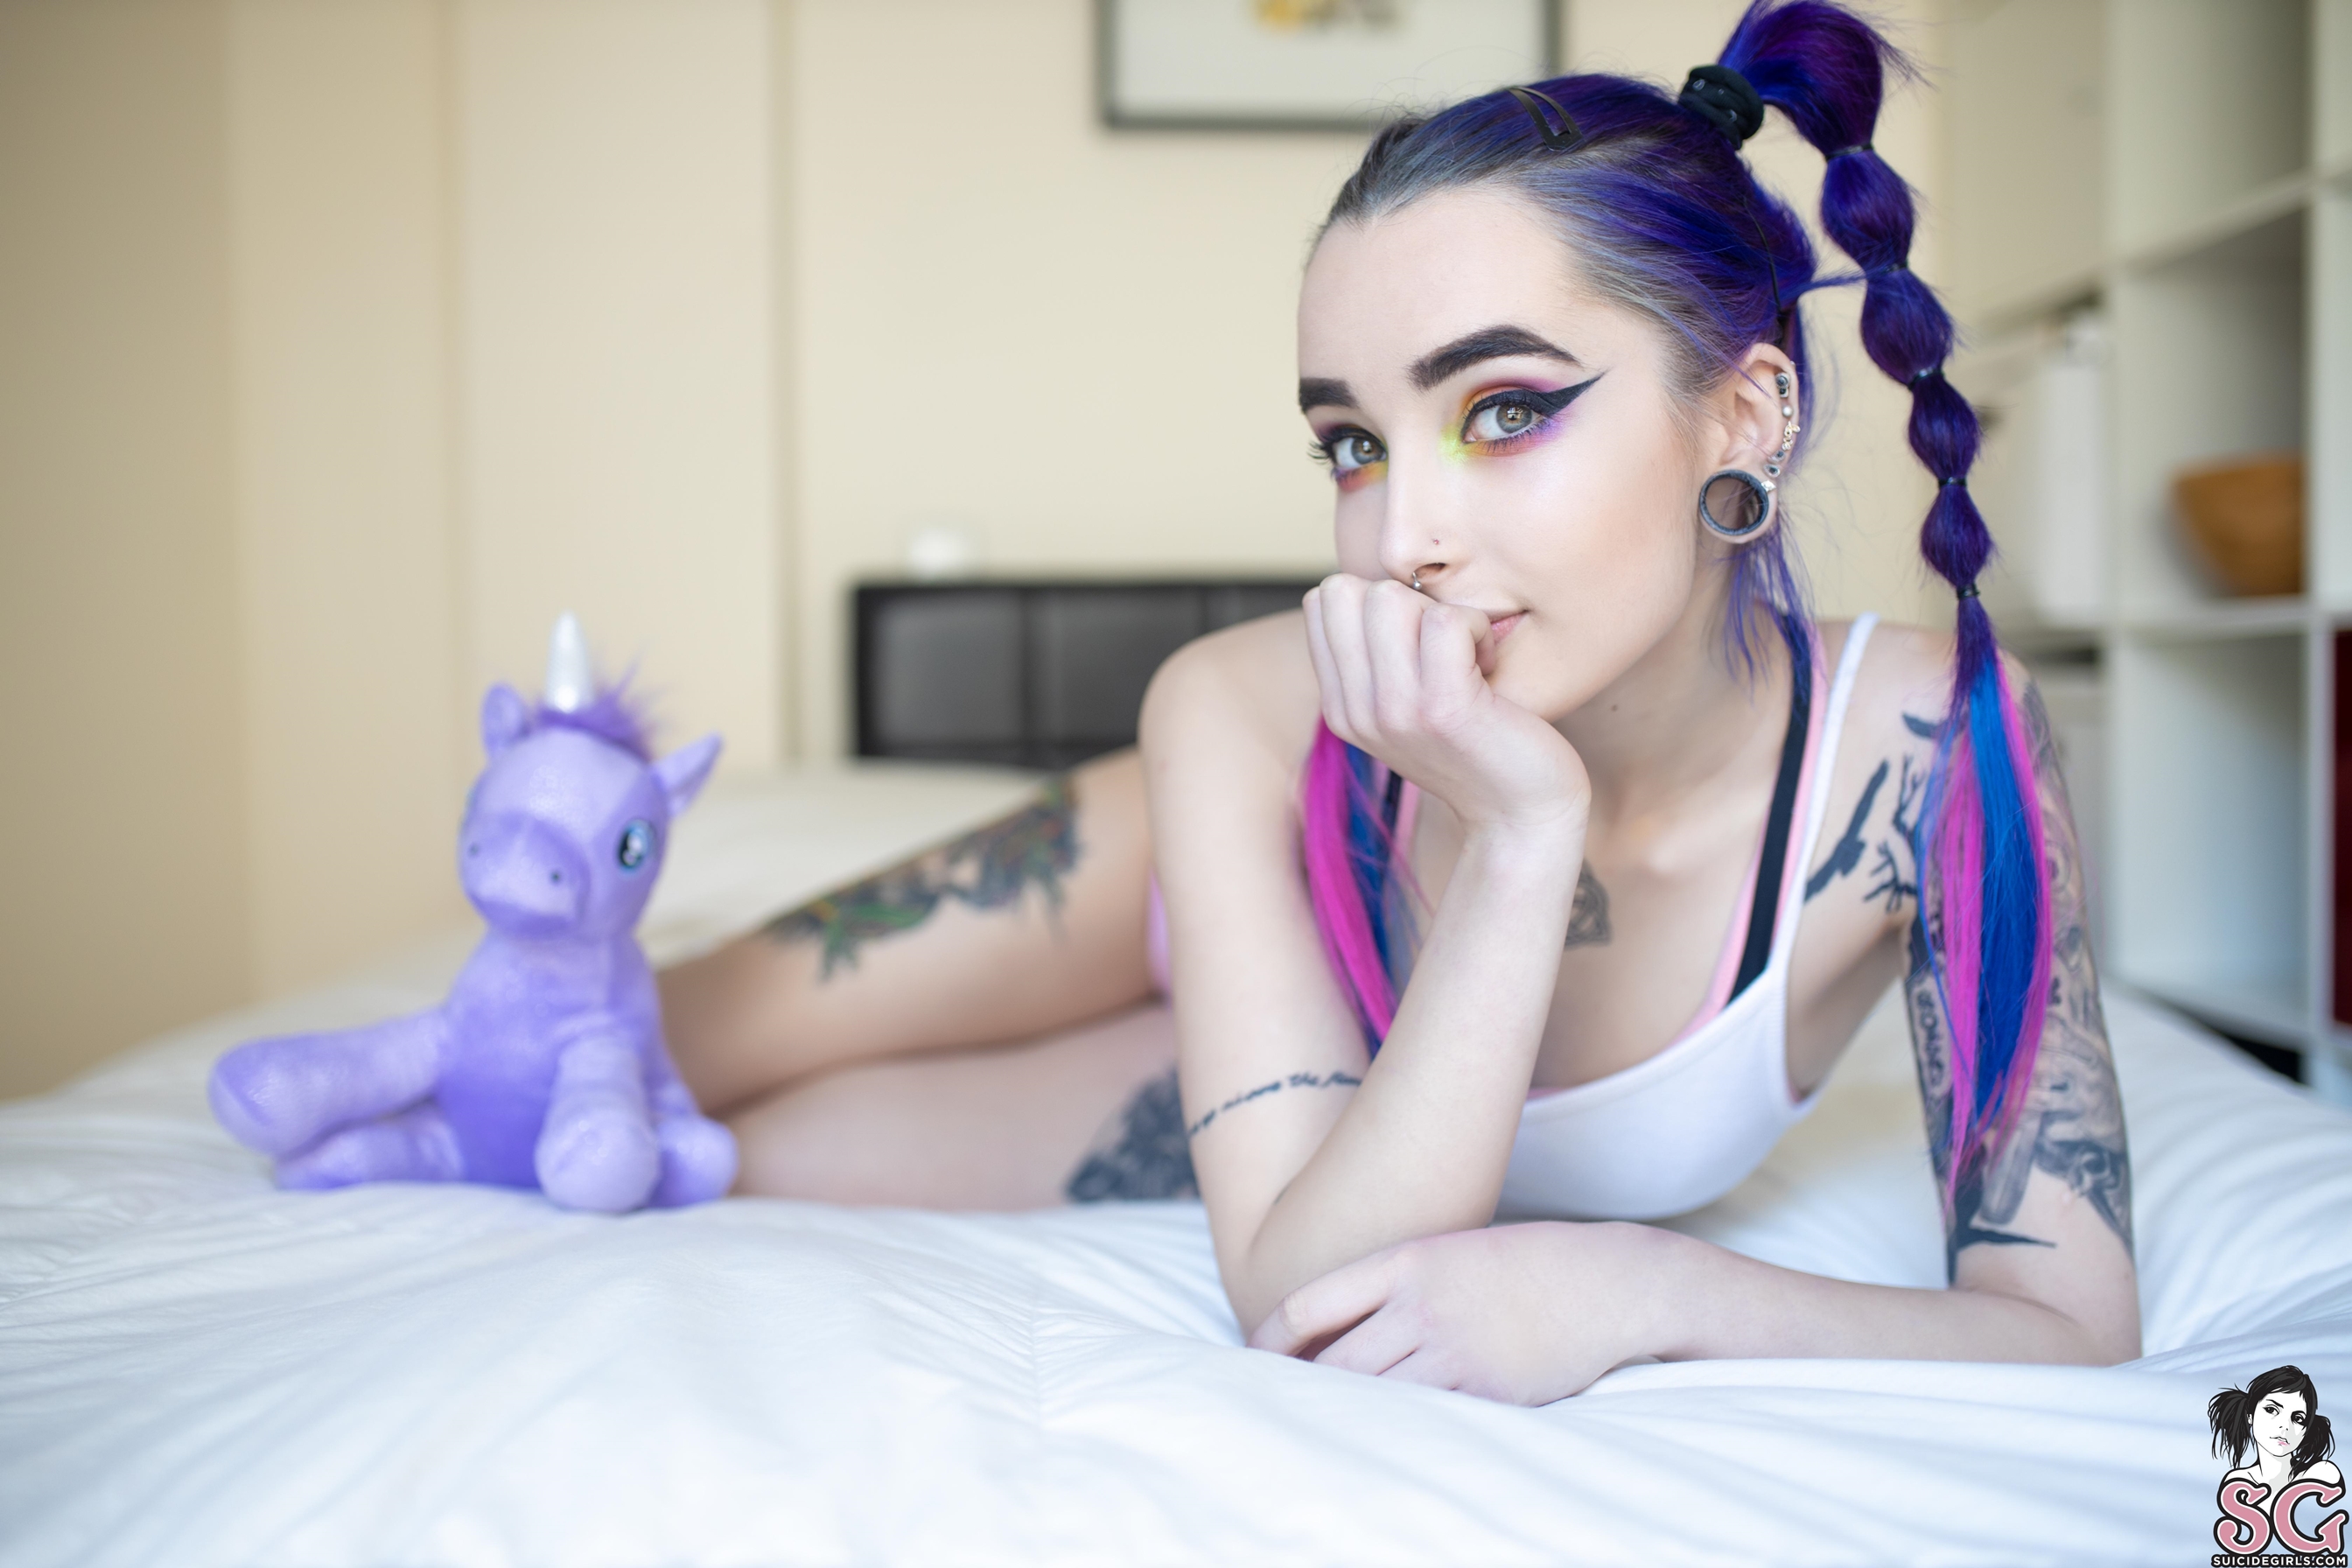 People 2688x1792 Kaegune Suicide Girls twintails braids women model tattoo inked girls in bed face eyeliner dyed hair